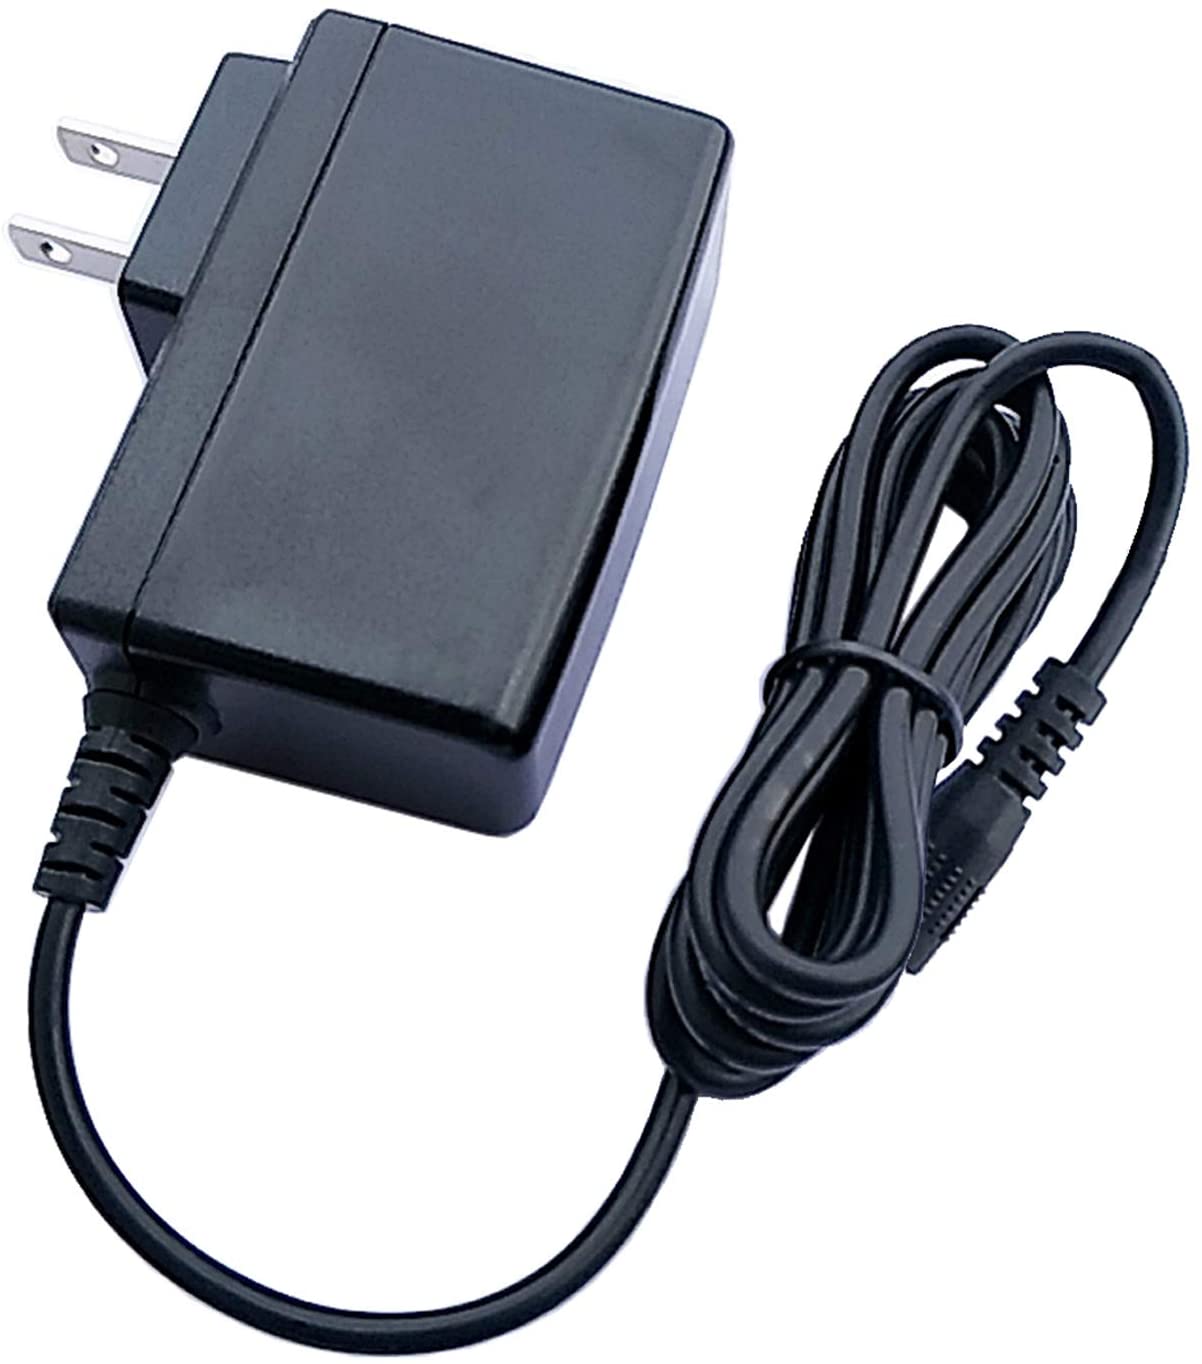 UpBright 12V AC/DC Adapter Compatible with ViewSonic NMP-570W NMP580-W NMP570W NMP580W Network Media Player Model VS14604 VS16291 T2A114200042 VSWM01 Y9EPWA-01XXX 12VDC Power Supply Battery Charger - image 2 of 5